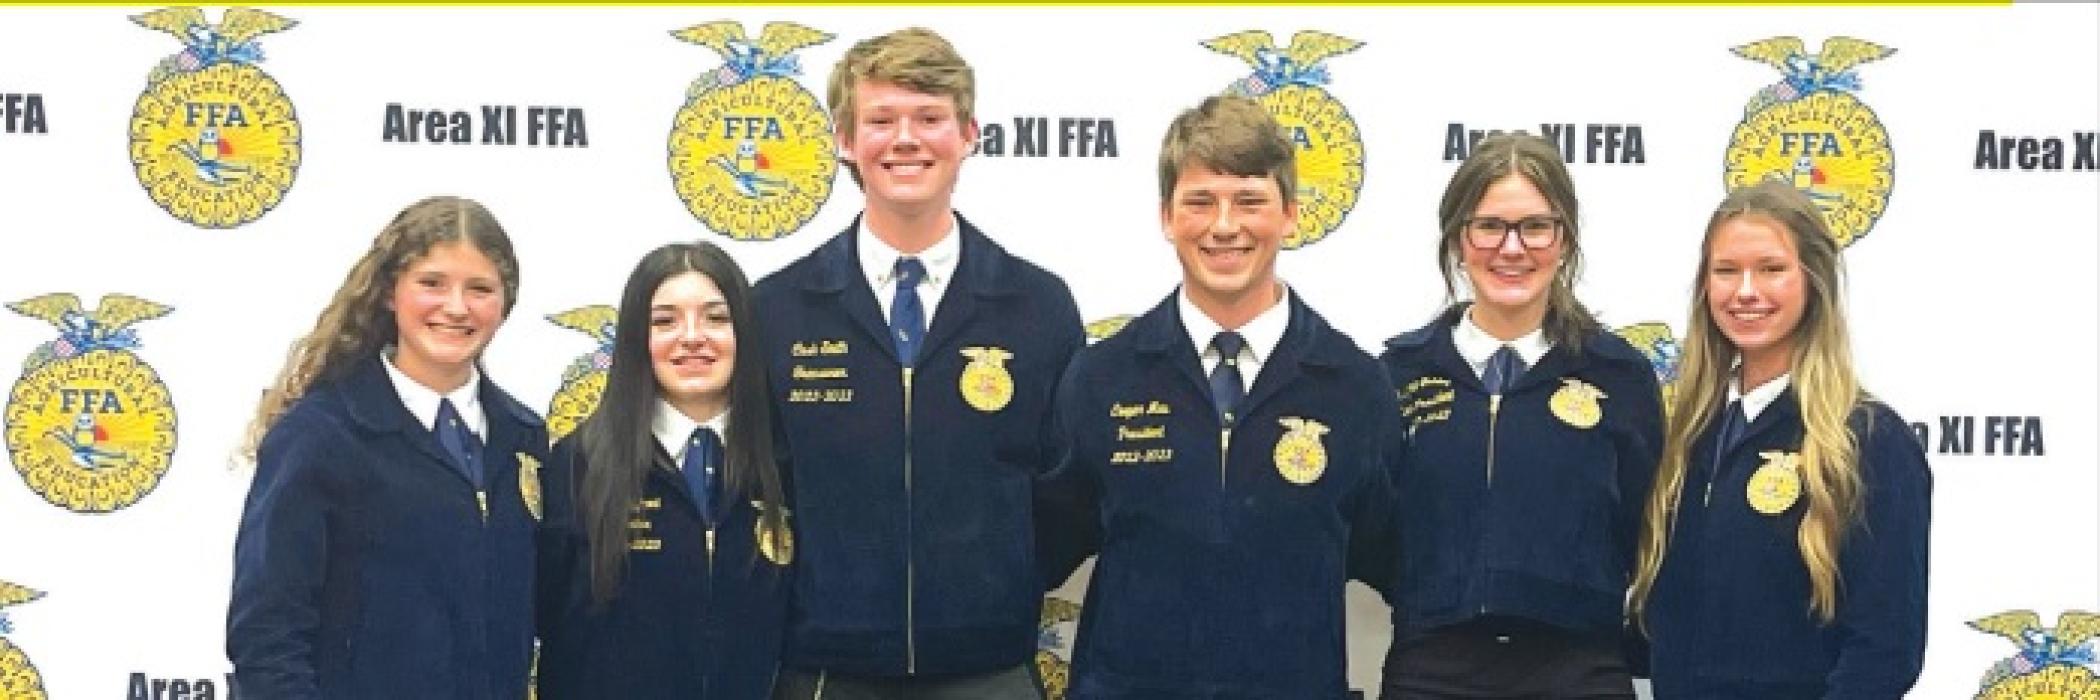 Cash Smith Elected to Area FFA Post